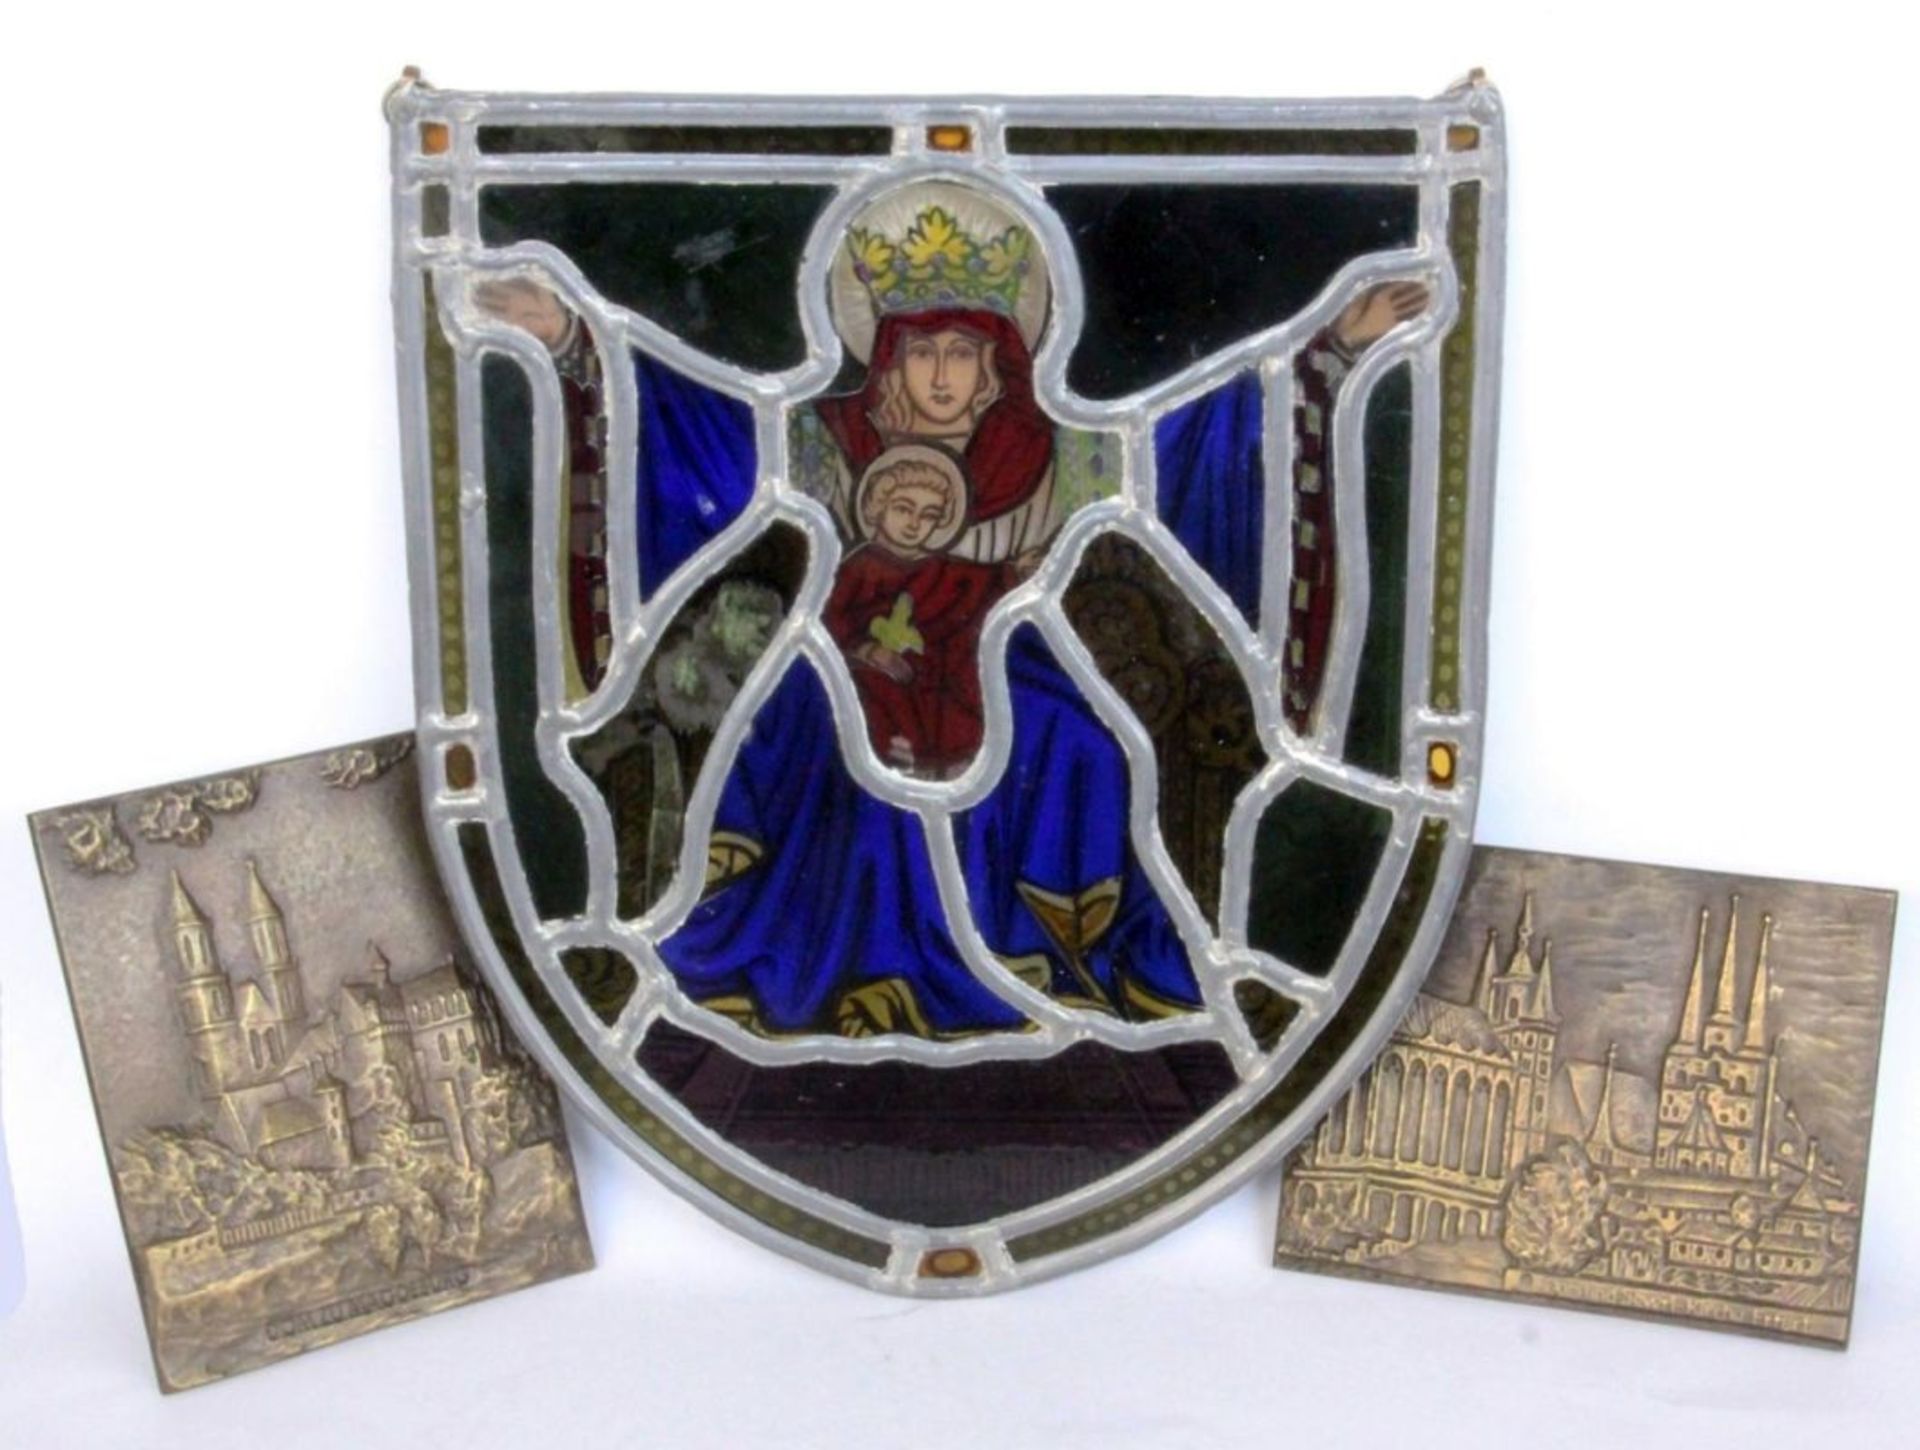 A LEADLIGHT with colourfully painted Madonna with Child. 29 x 25.5 cm. Includes 2 bronze